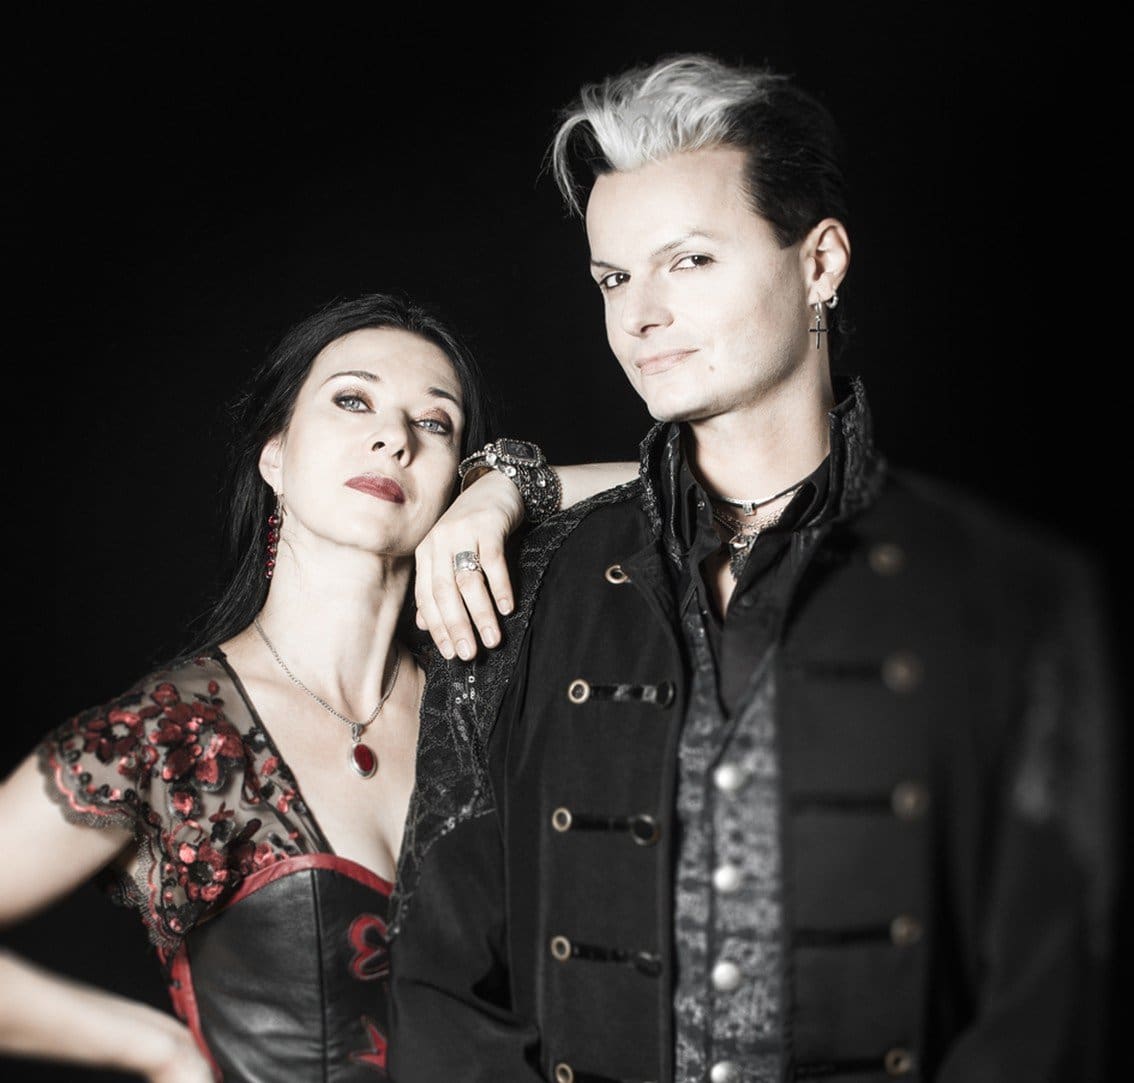 Lacrimosa to release new studio album for their 25th band anniversary